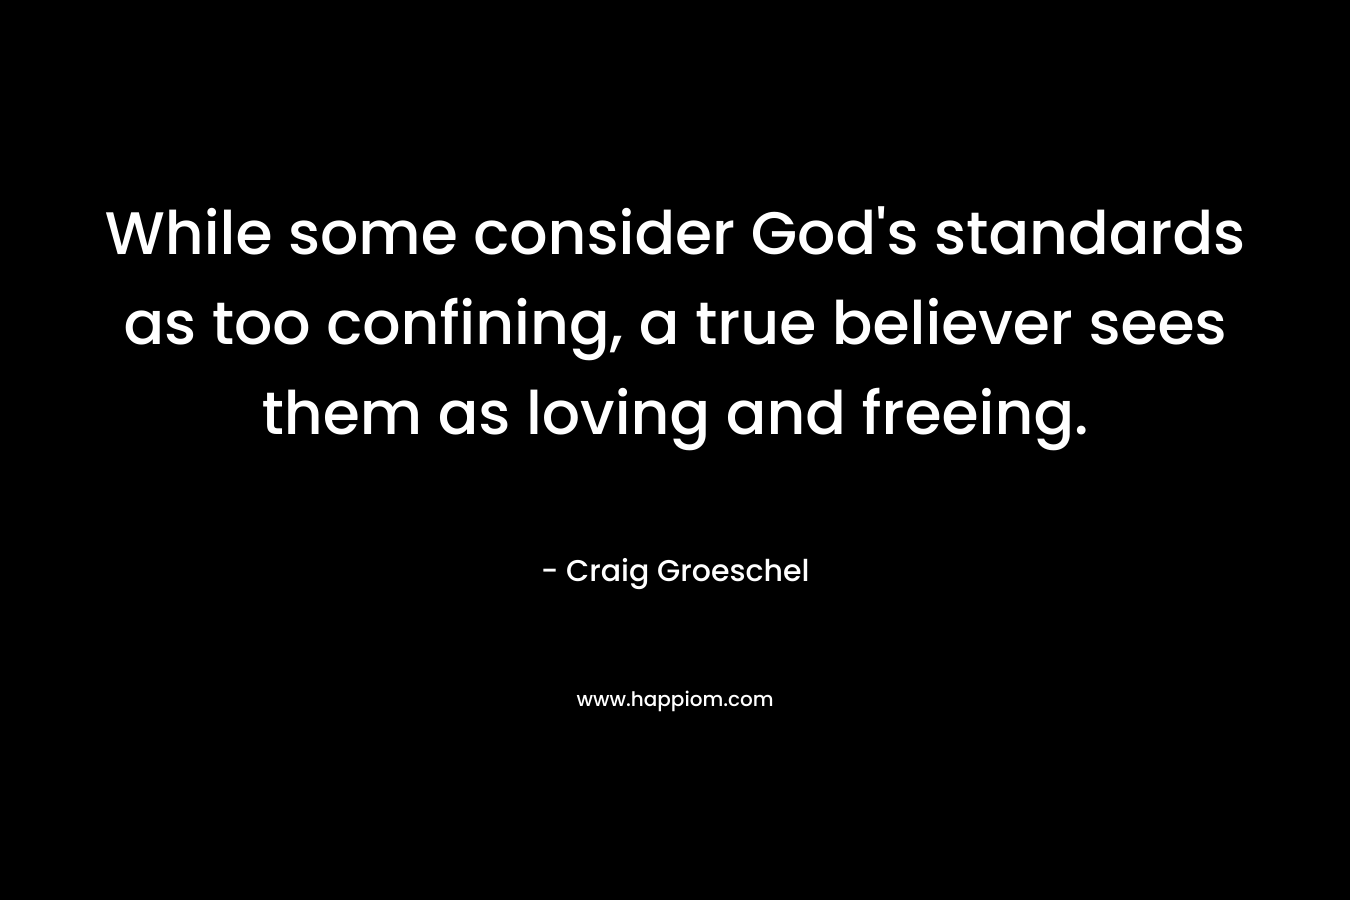 While some consider God’s standards as too confining, a true believer sees them as loving and freeing. – Craig Groeschel